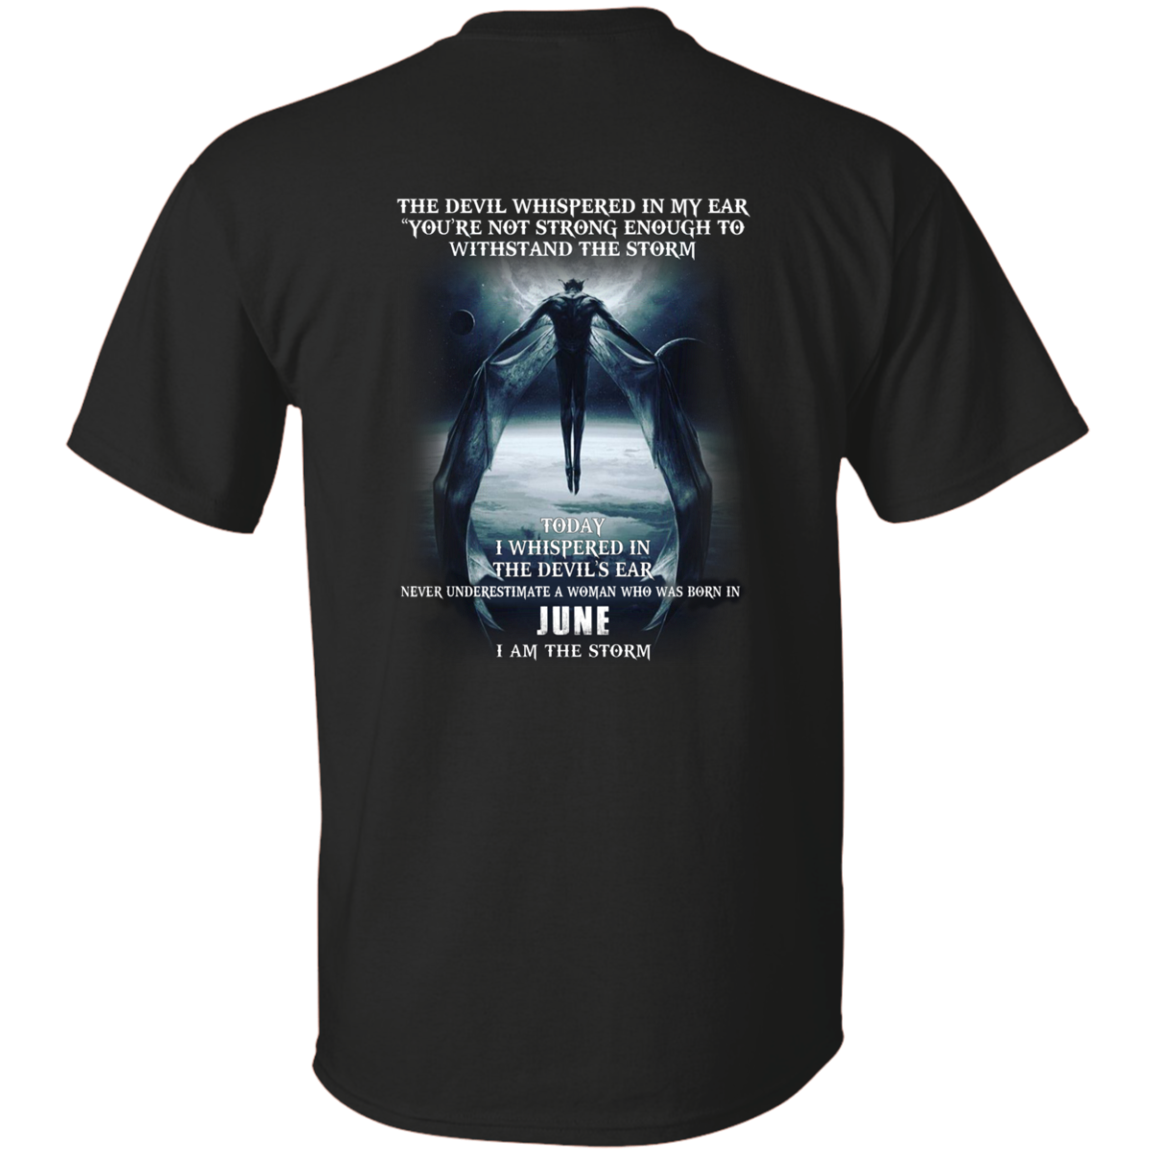 The devil whispered in my ear, a woman was born in June shirt